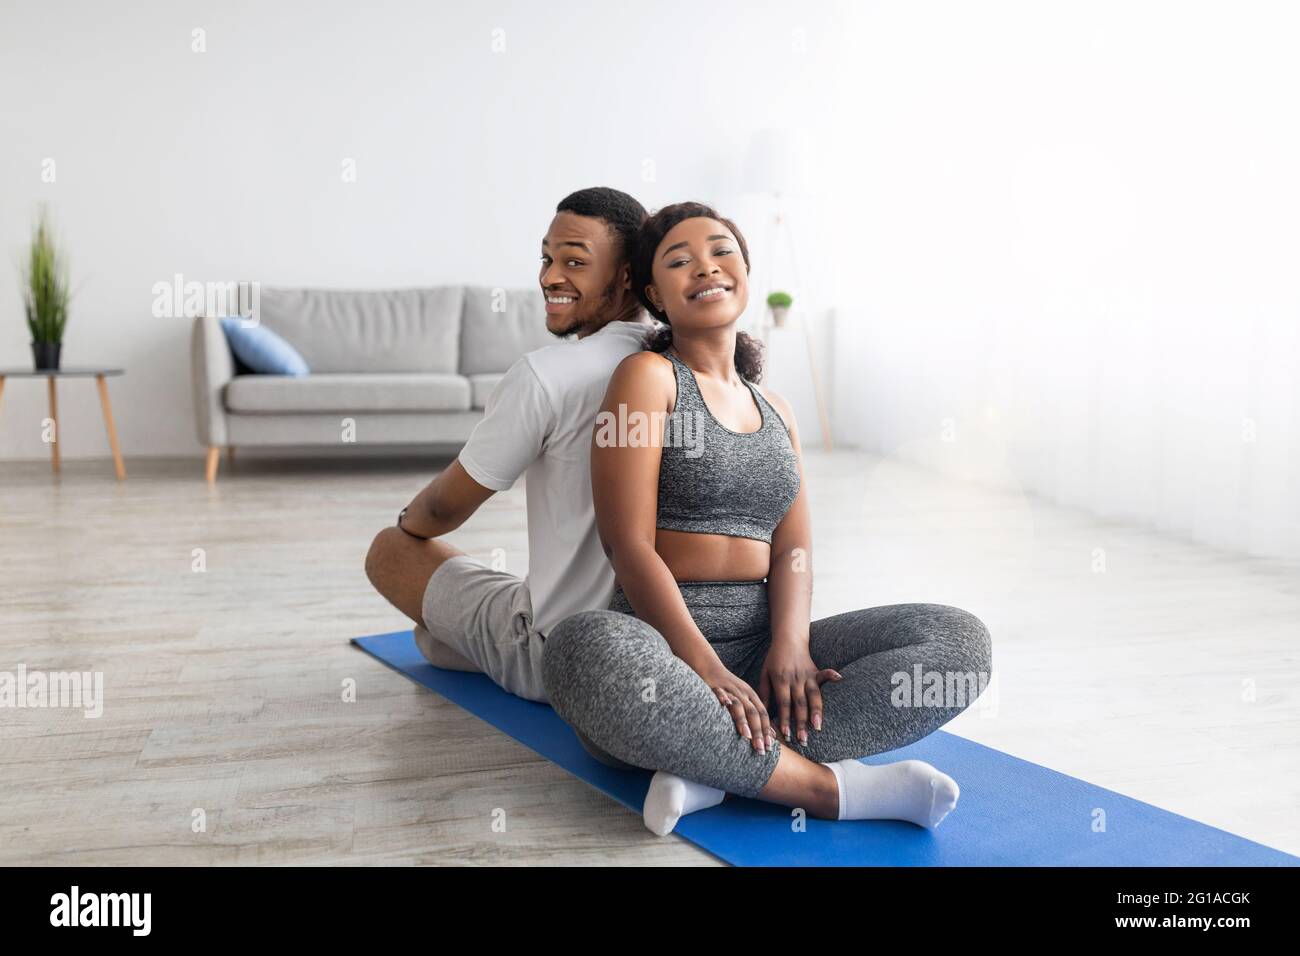 Smiling African American couple relaxing after yoga practice, sitting on fitness mat back to back, smiling at camera Stock Photo